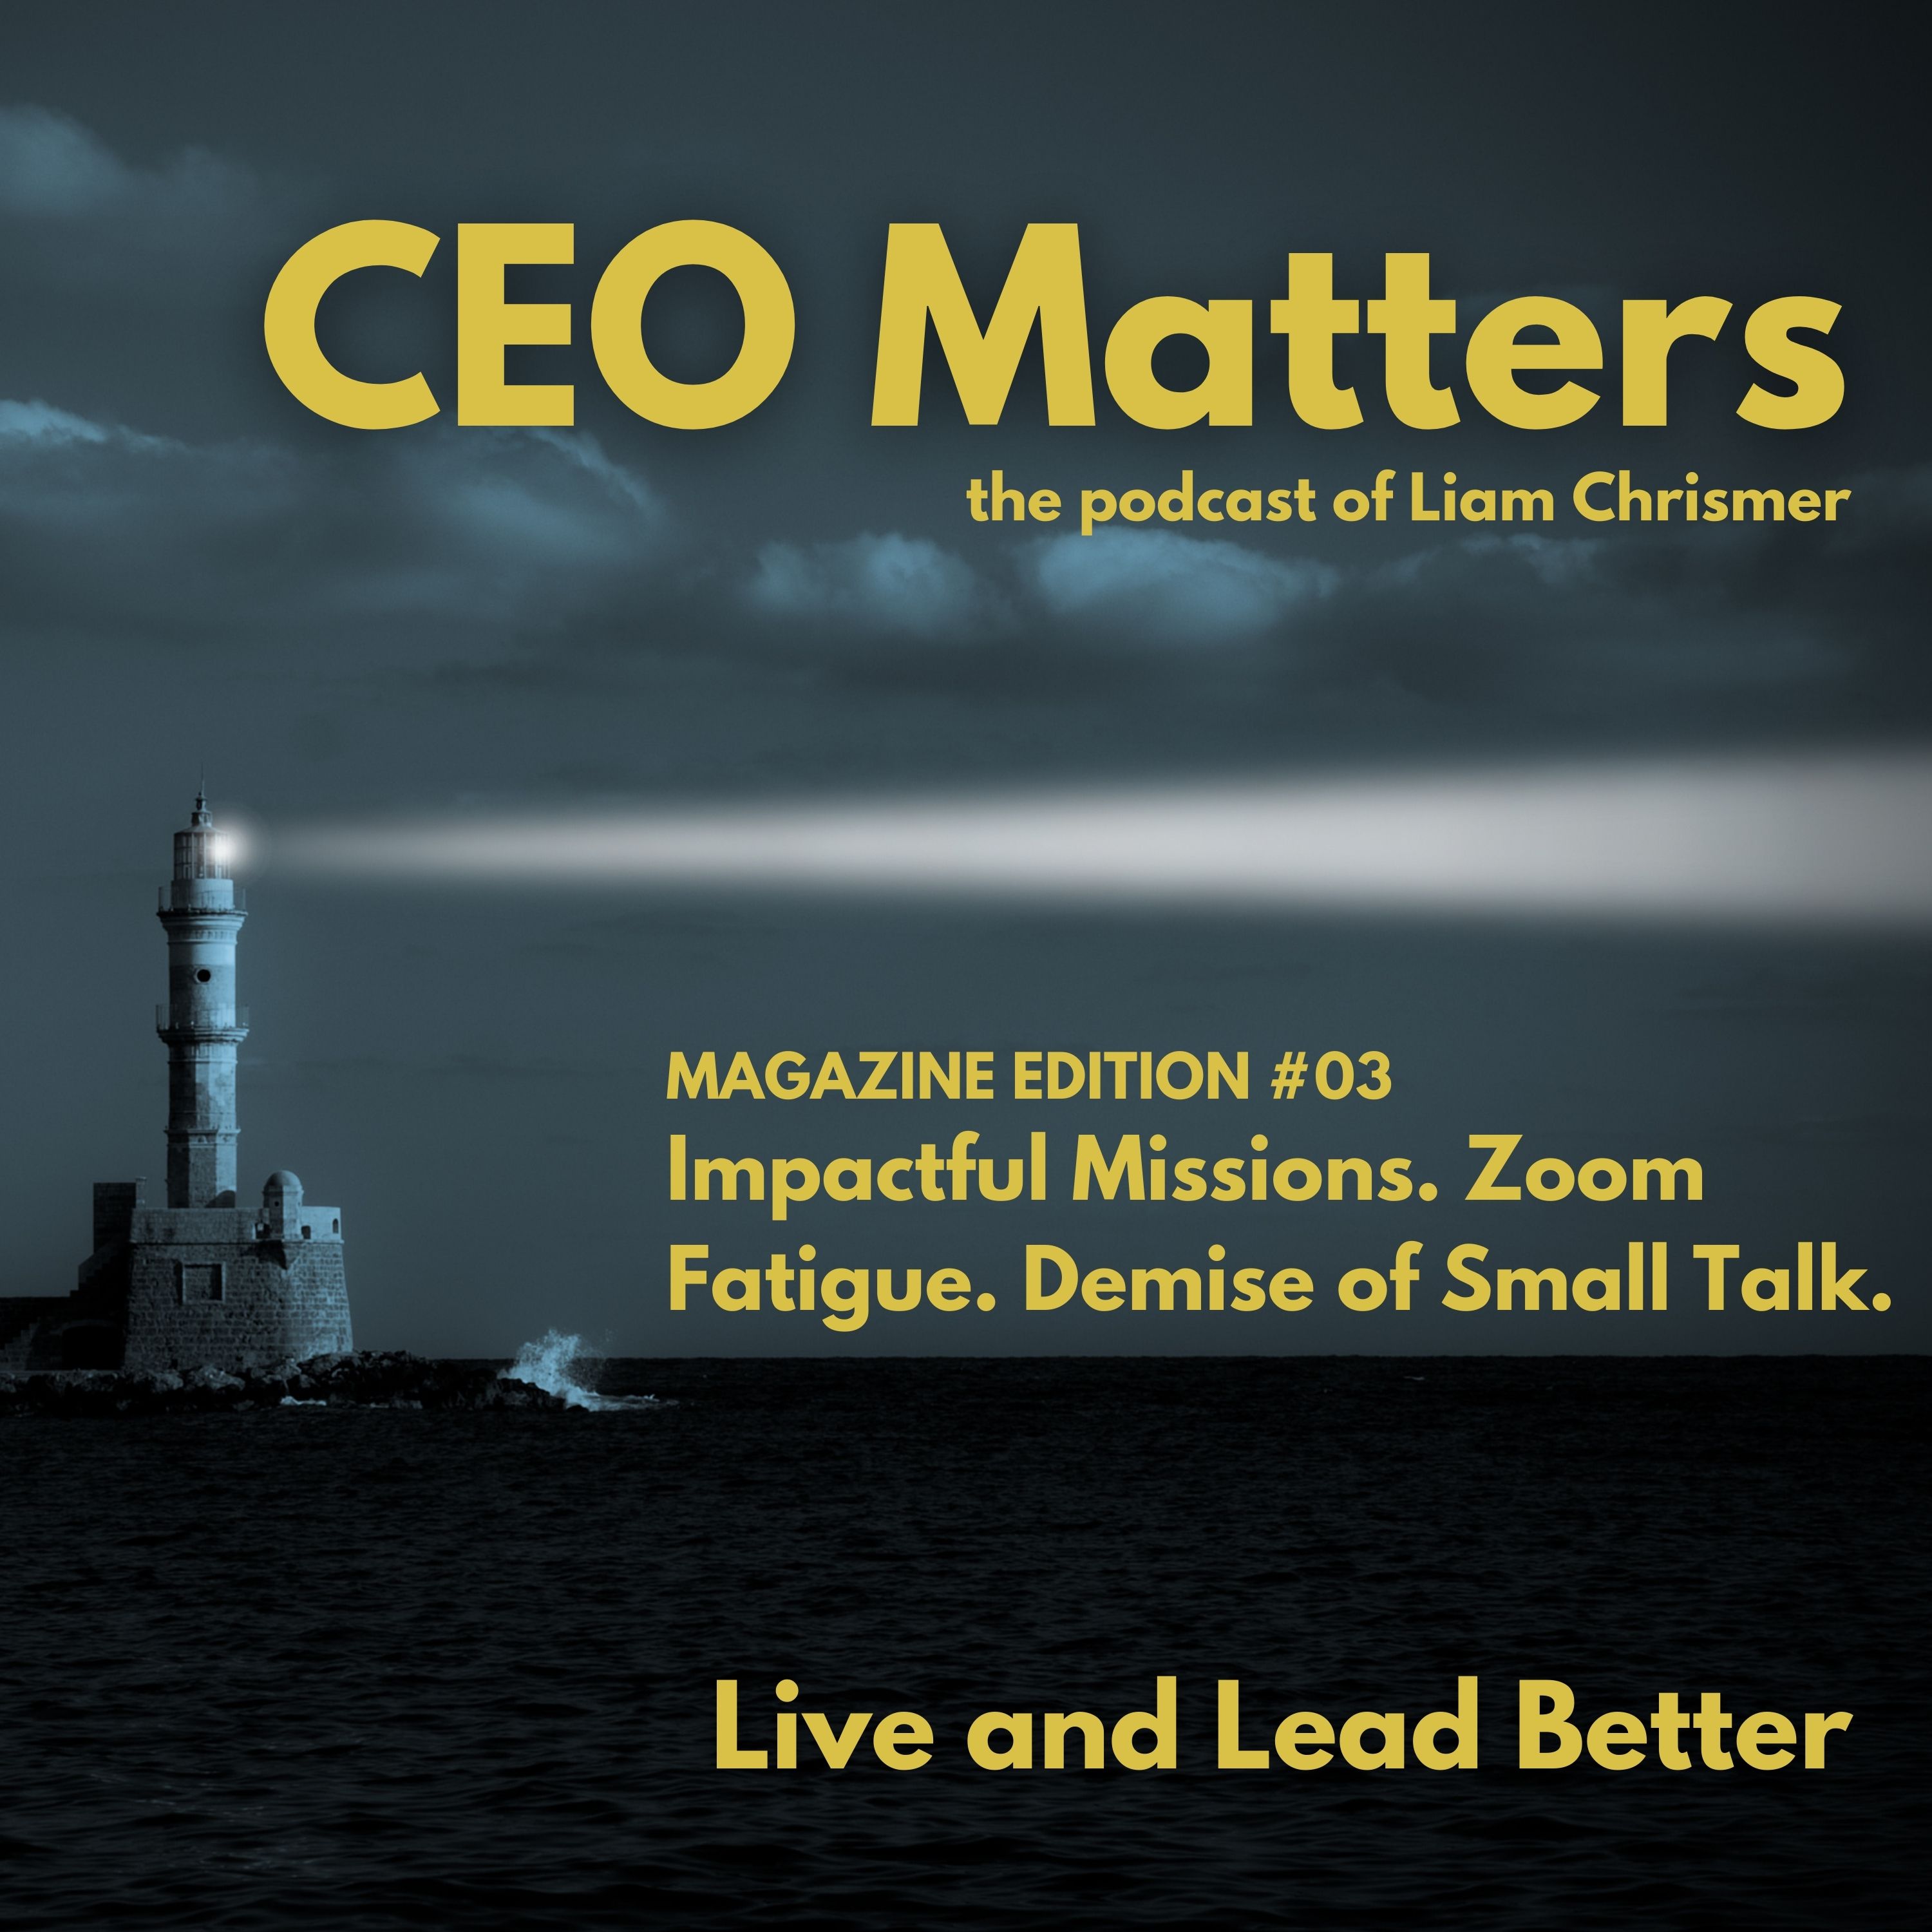 Magazine Edition: Impactful Missions. Zoom Fatigue. Demise of Small Talk. | MAG003